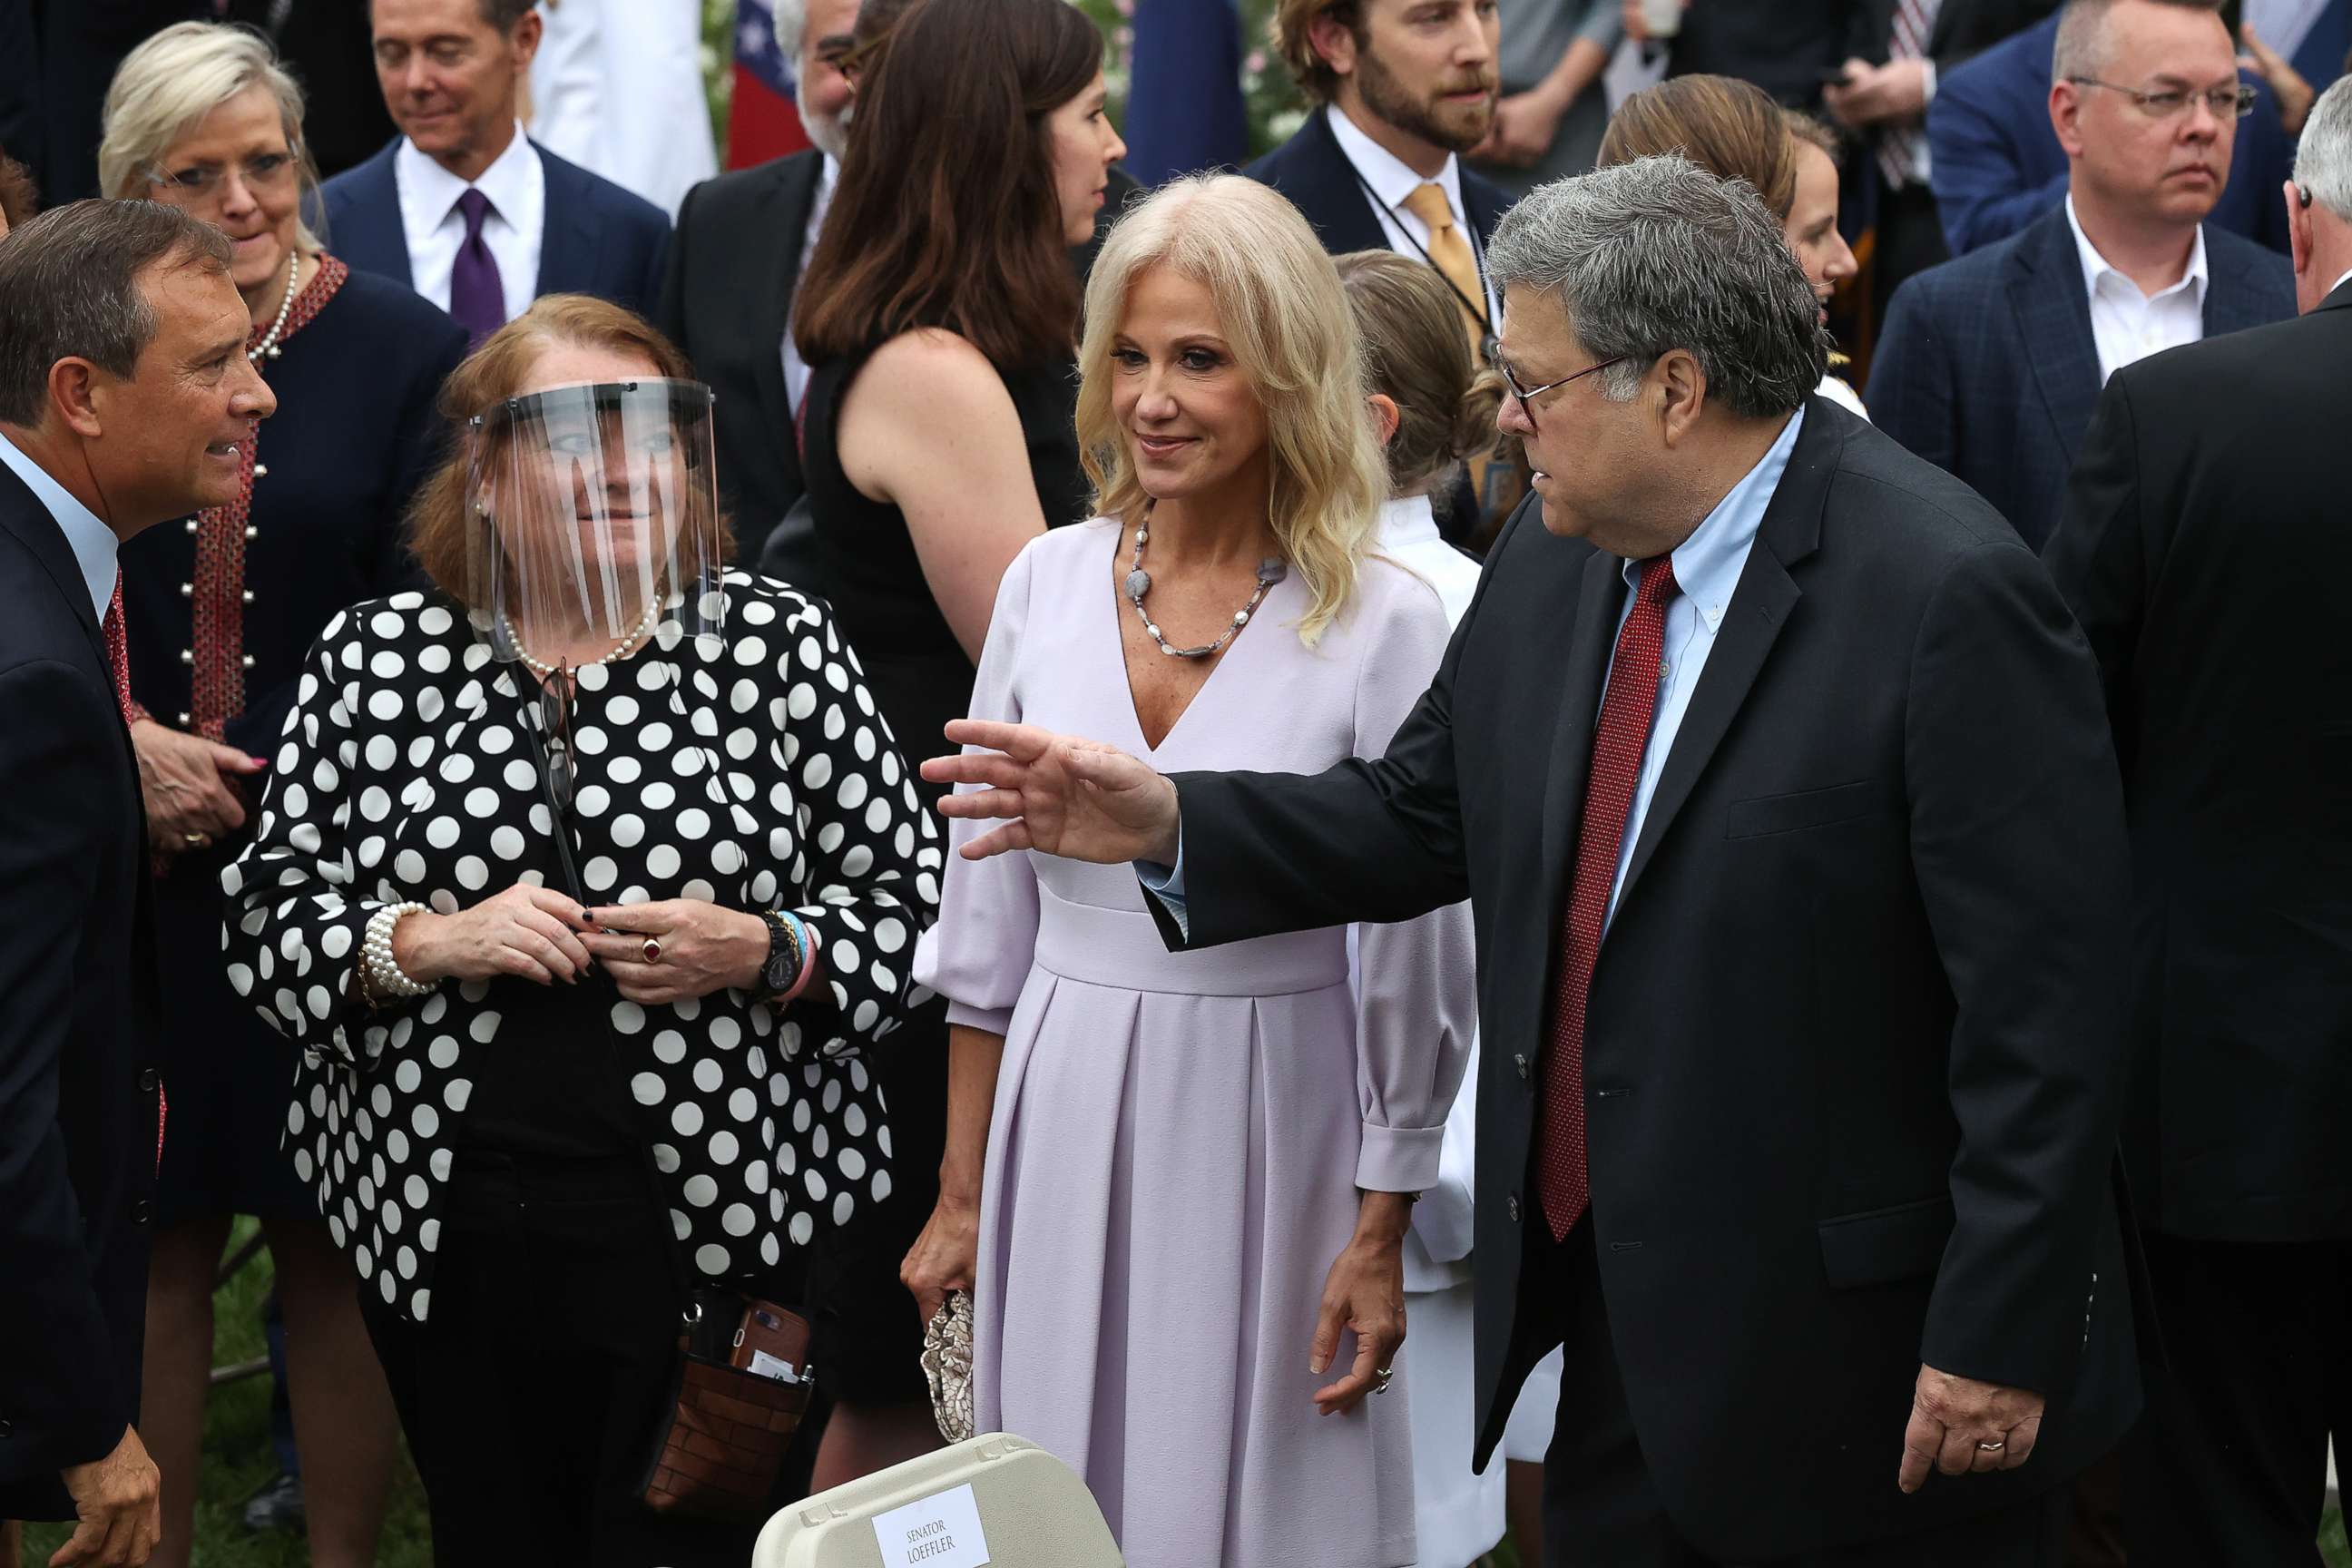 PHOTO: Former counselor to the president Kellyanne Conway, center, and Attorney General William Barr talk with guests in the Rose Garden after President Donald Trump introduced Amy Coney Barrett as nominee to the Supreme Court, Sept. 26, 2020.